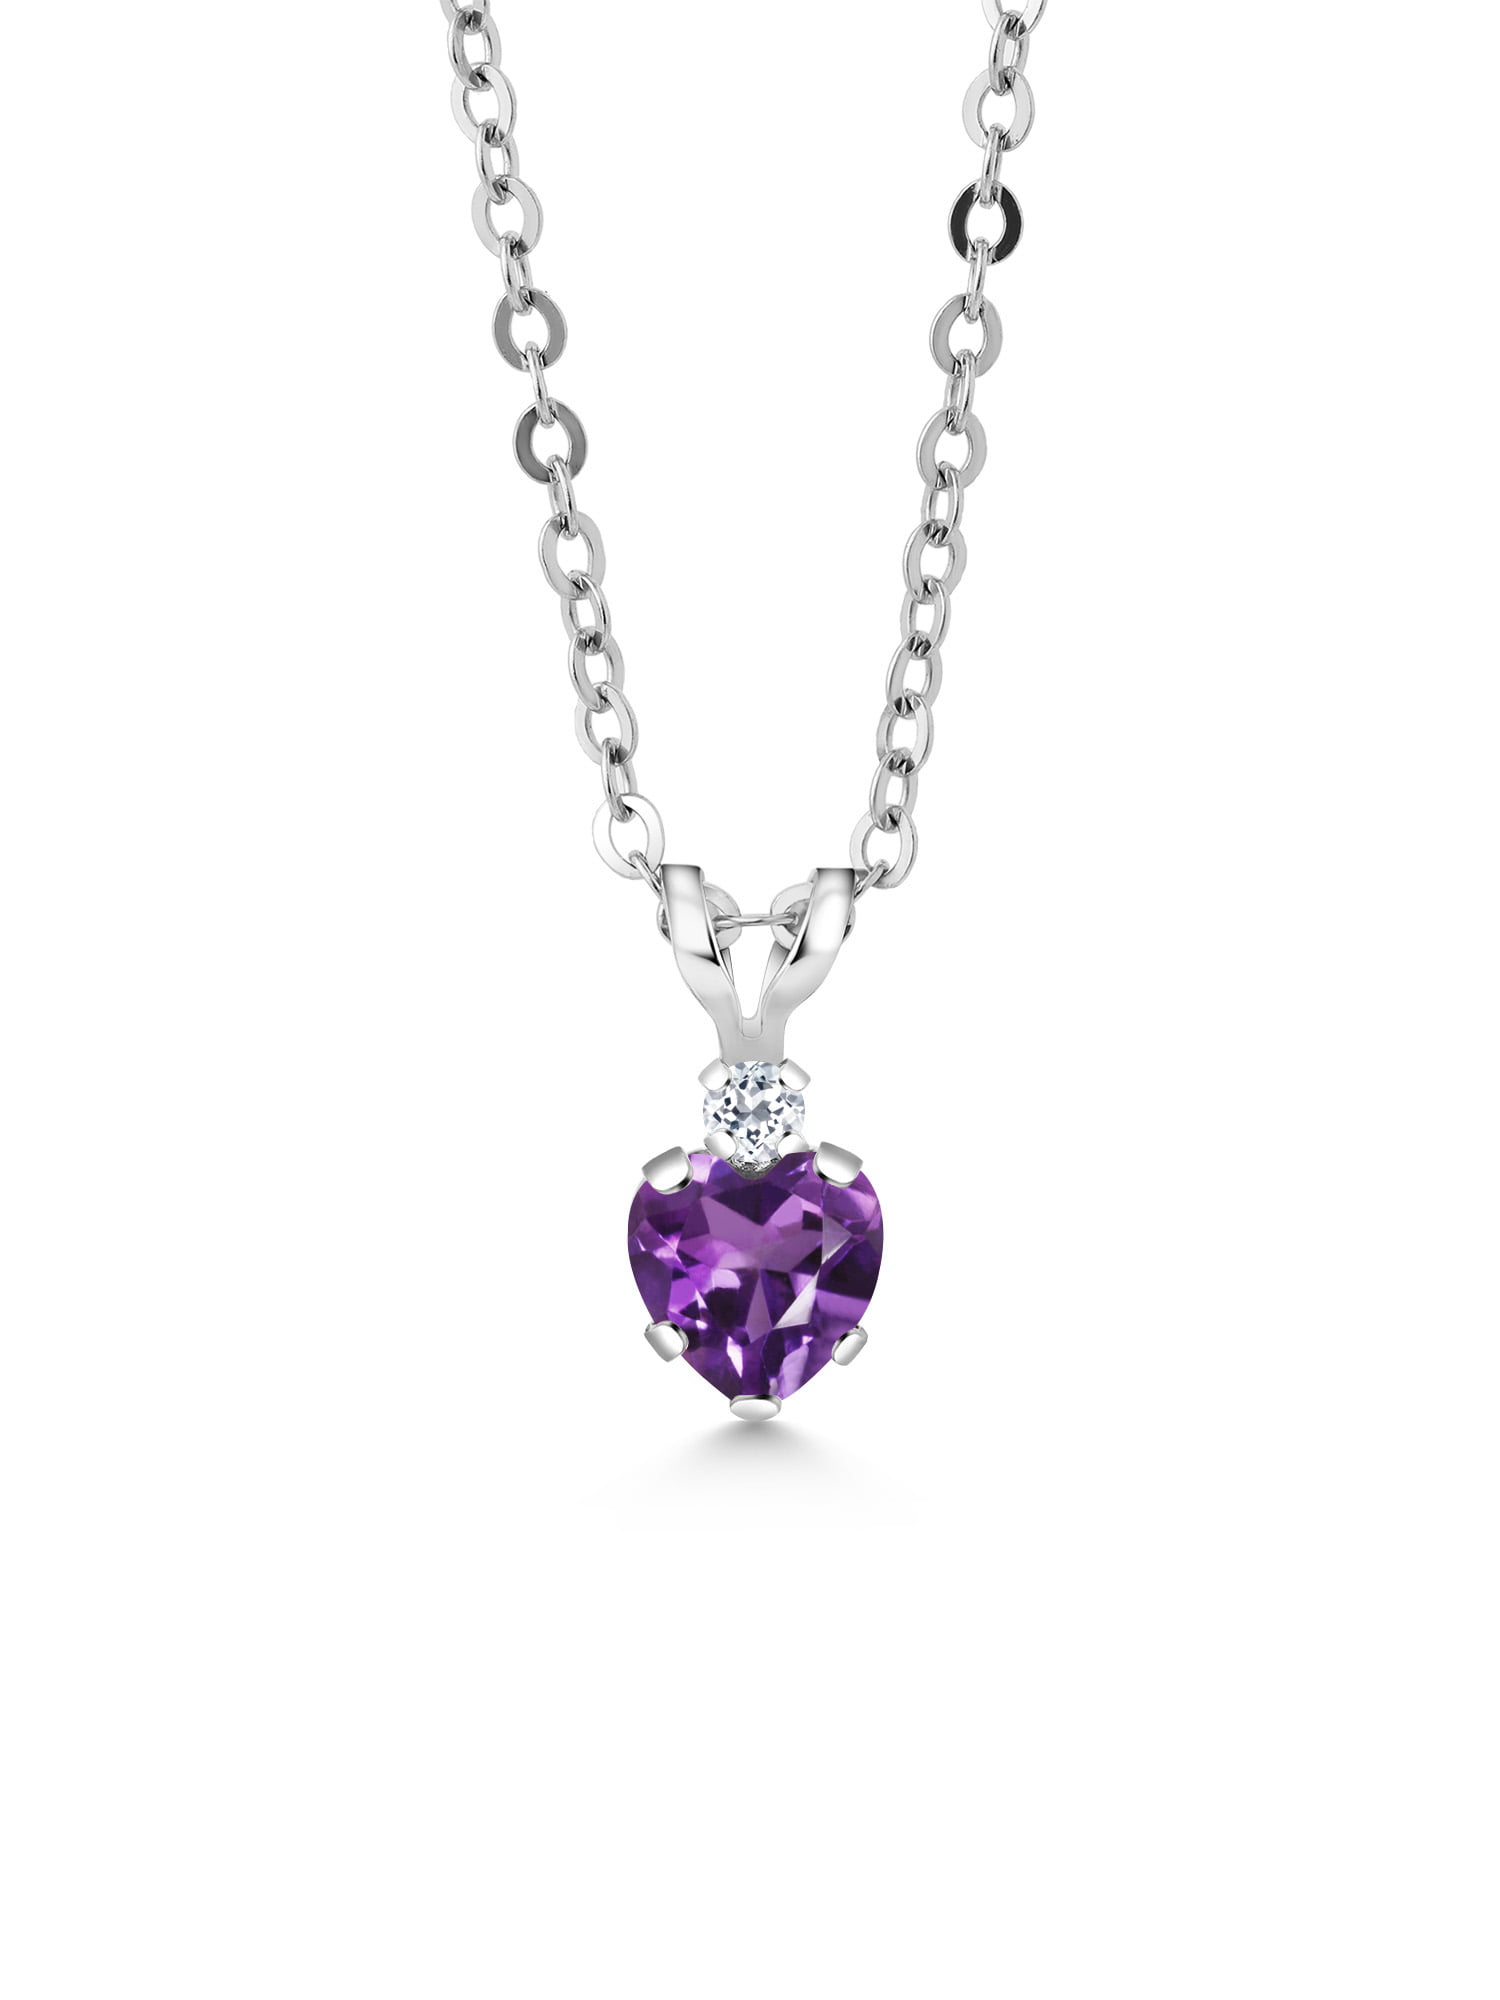 10k White Gold 3.6cttw Oval Amethyst and Diamond Pendant Necklace 